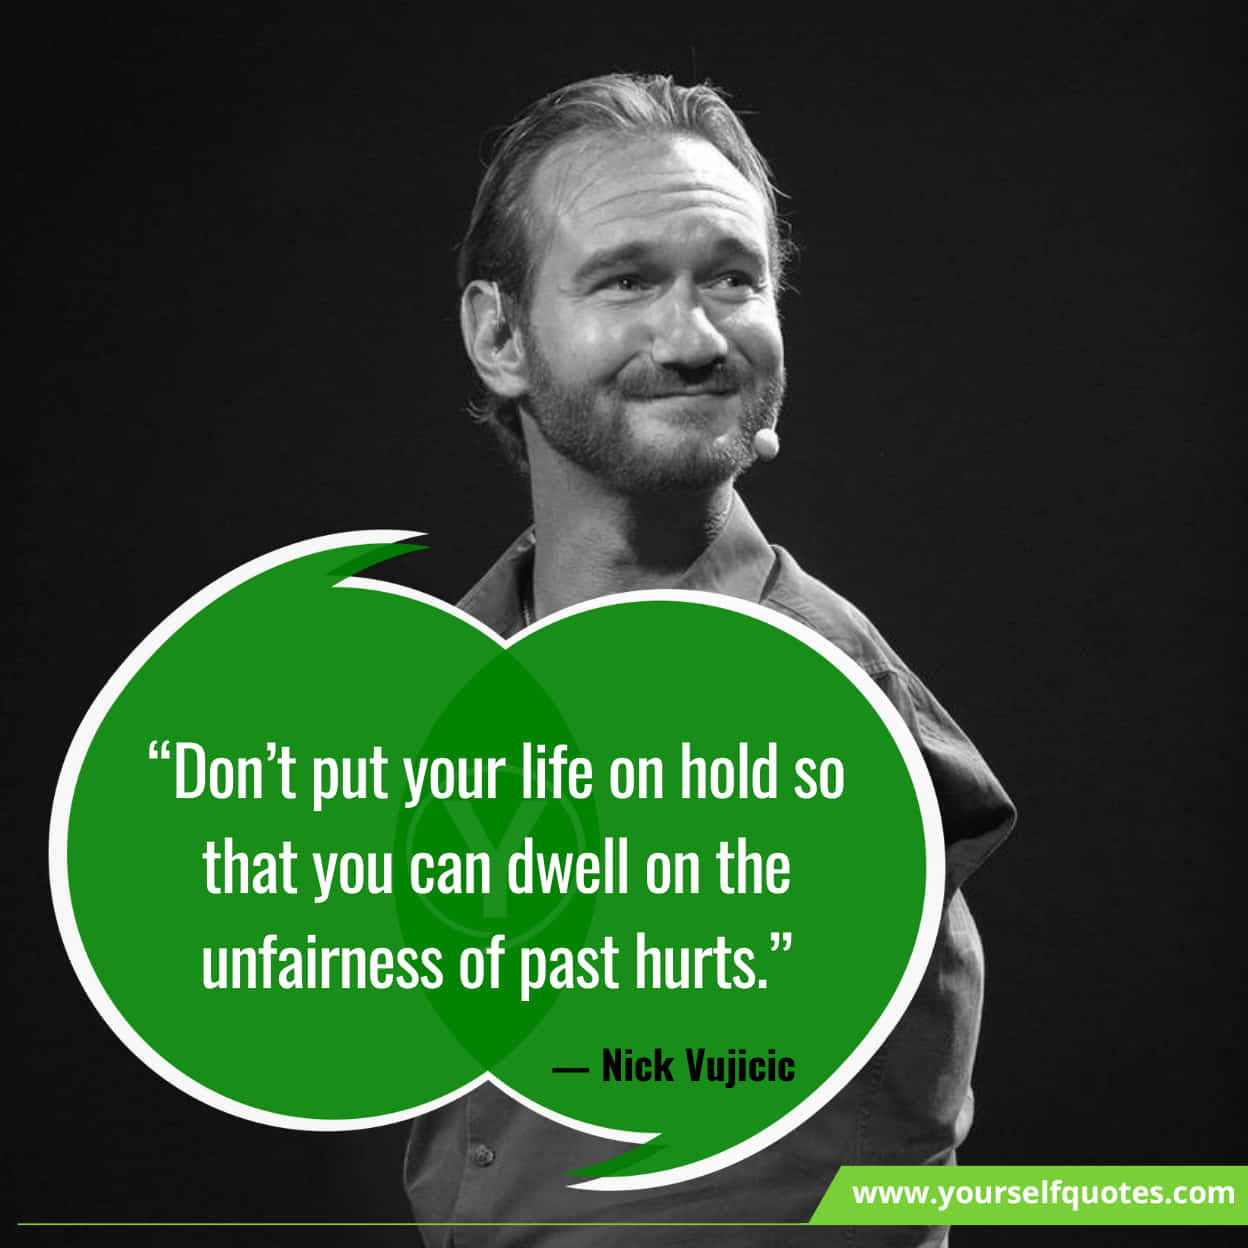 Nick Vujicic Quotes Never Give Up Quotes